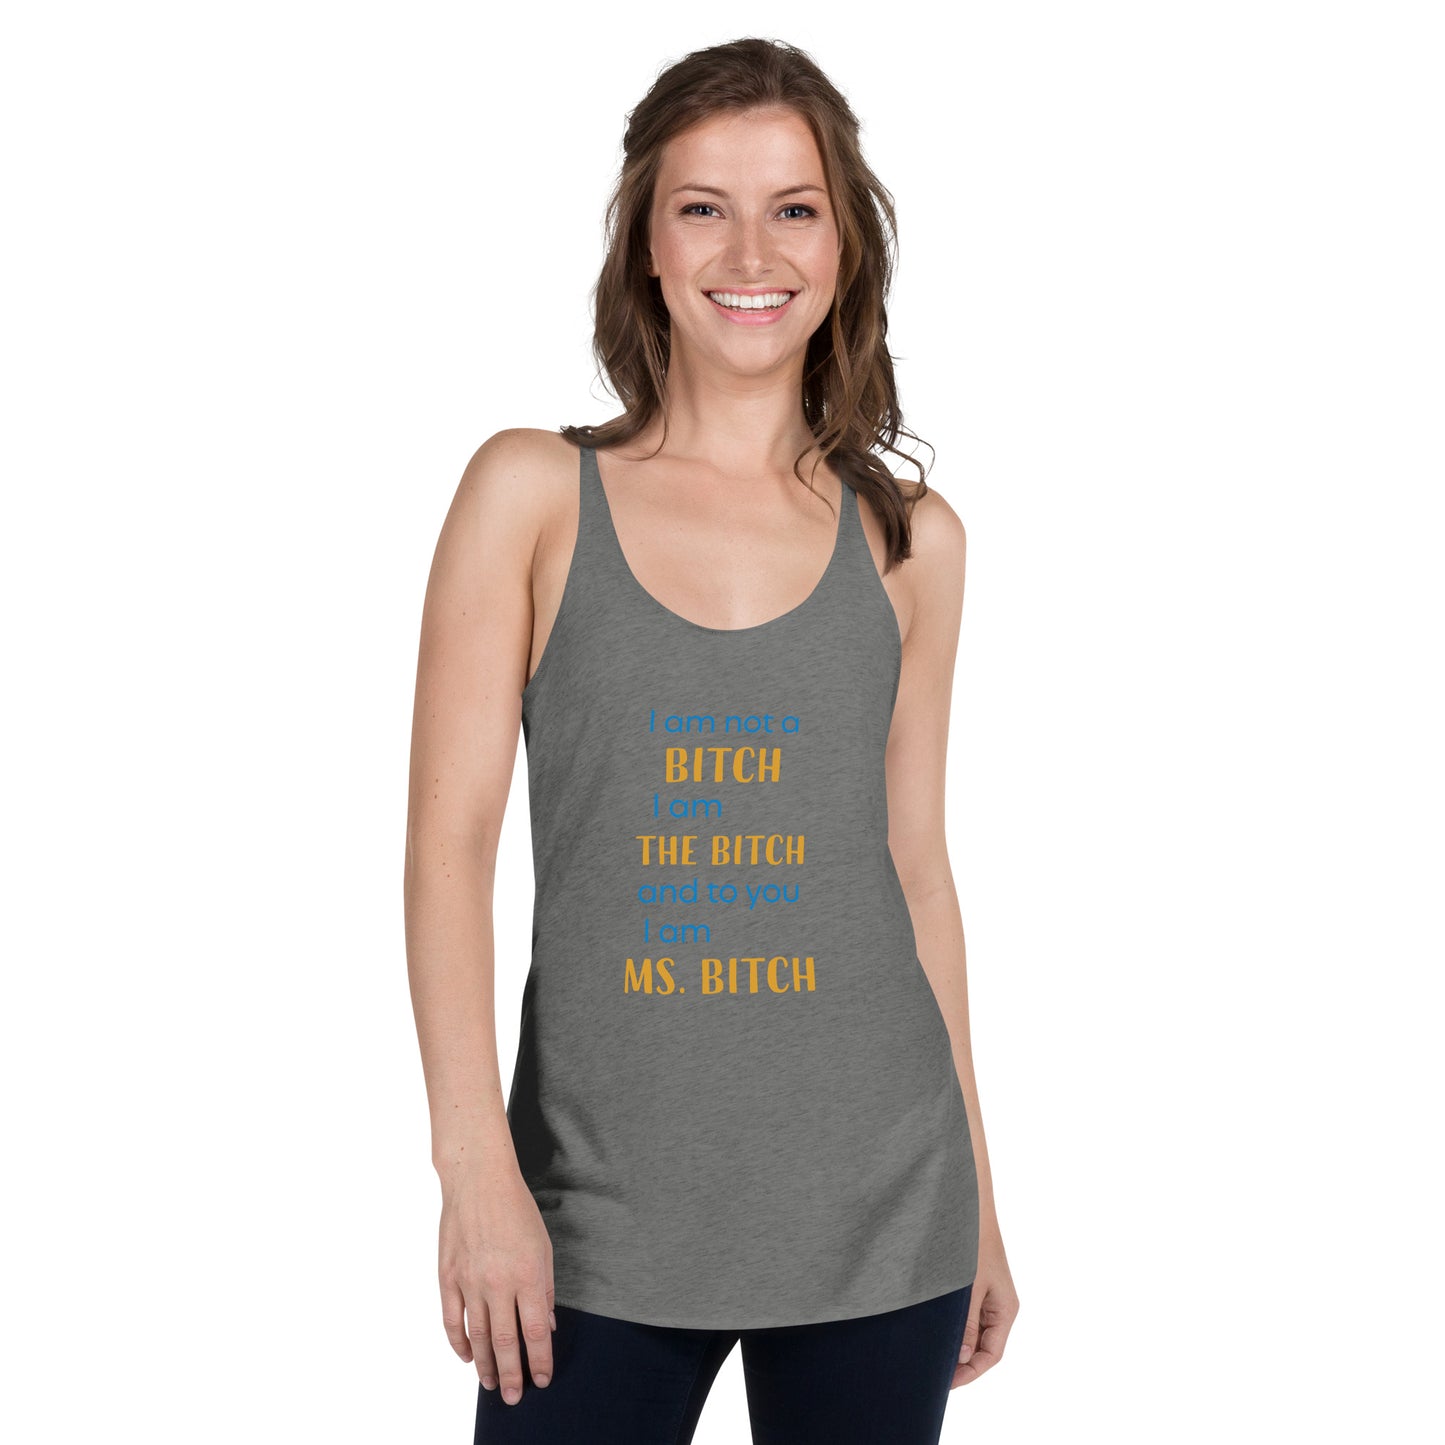 Women with grey tank top with the text "to you I'm MS bitch"